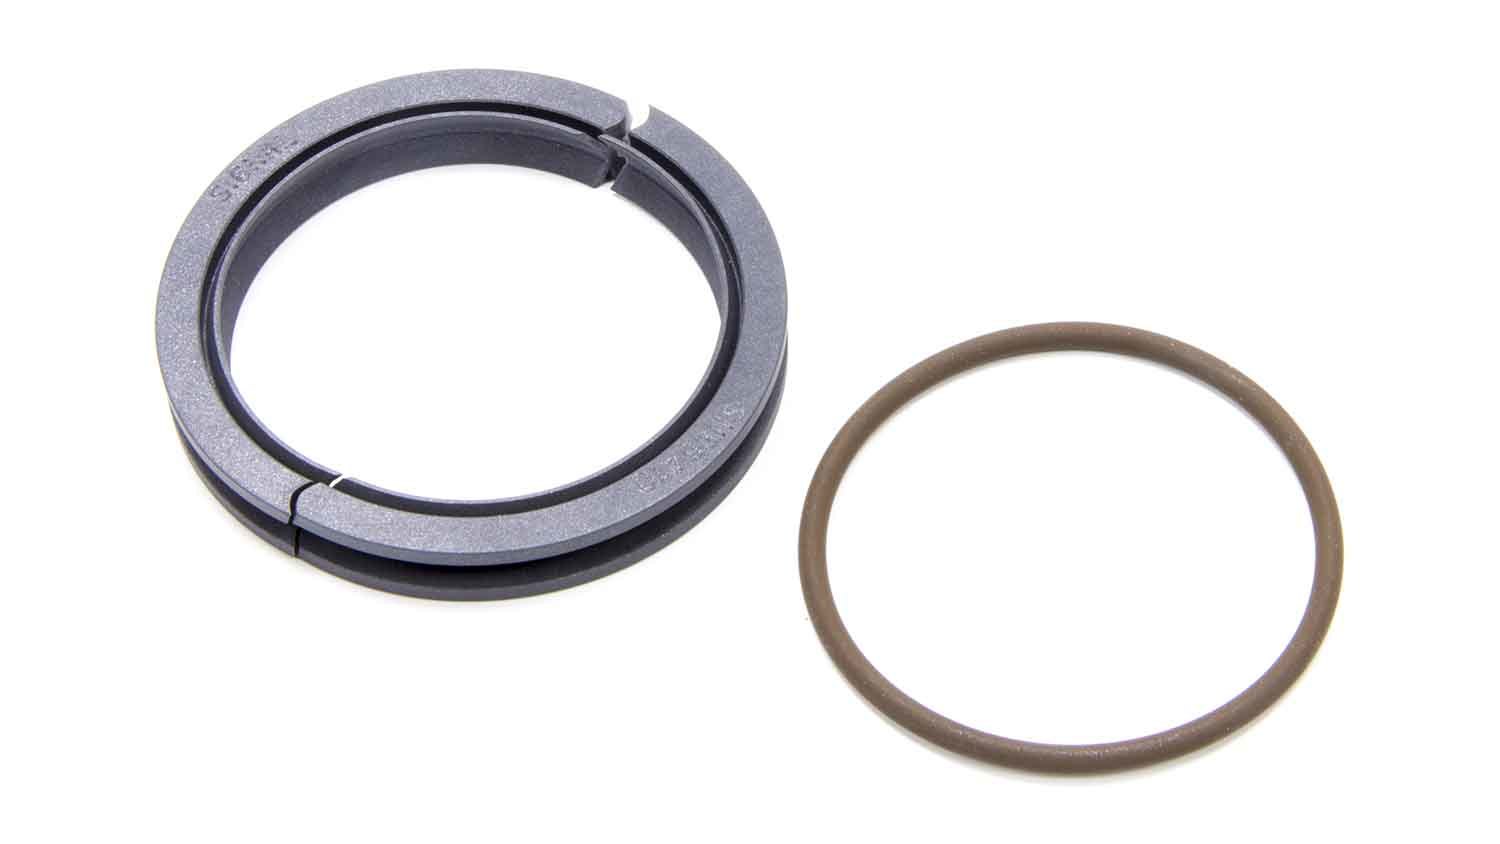 Cometic Gaskets C5672 - Rear Main Seal, 2 Piece, Rubber, 400 Block, Small Block Chevy, Each